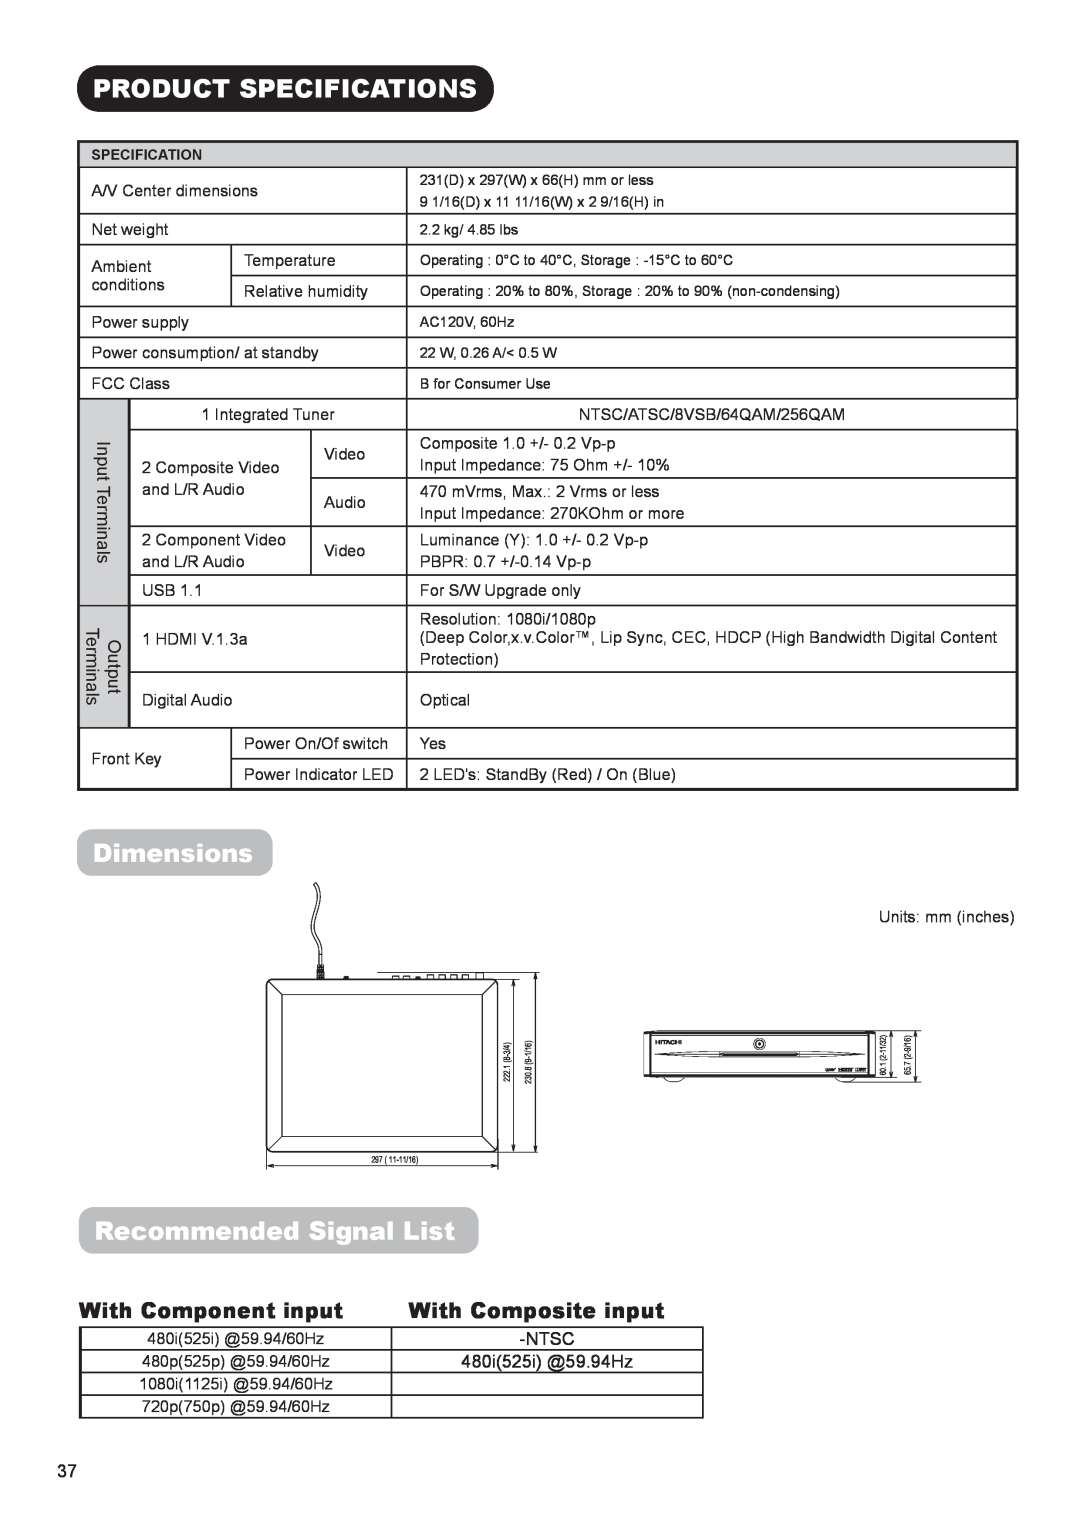 Hitachi AVC01U Product Specifications, Dimensions, Recommended Signal List, With Component input, With Composite input 